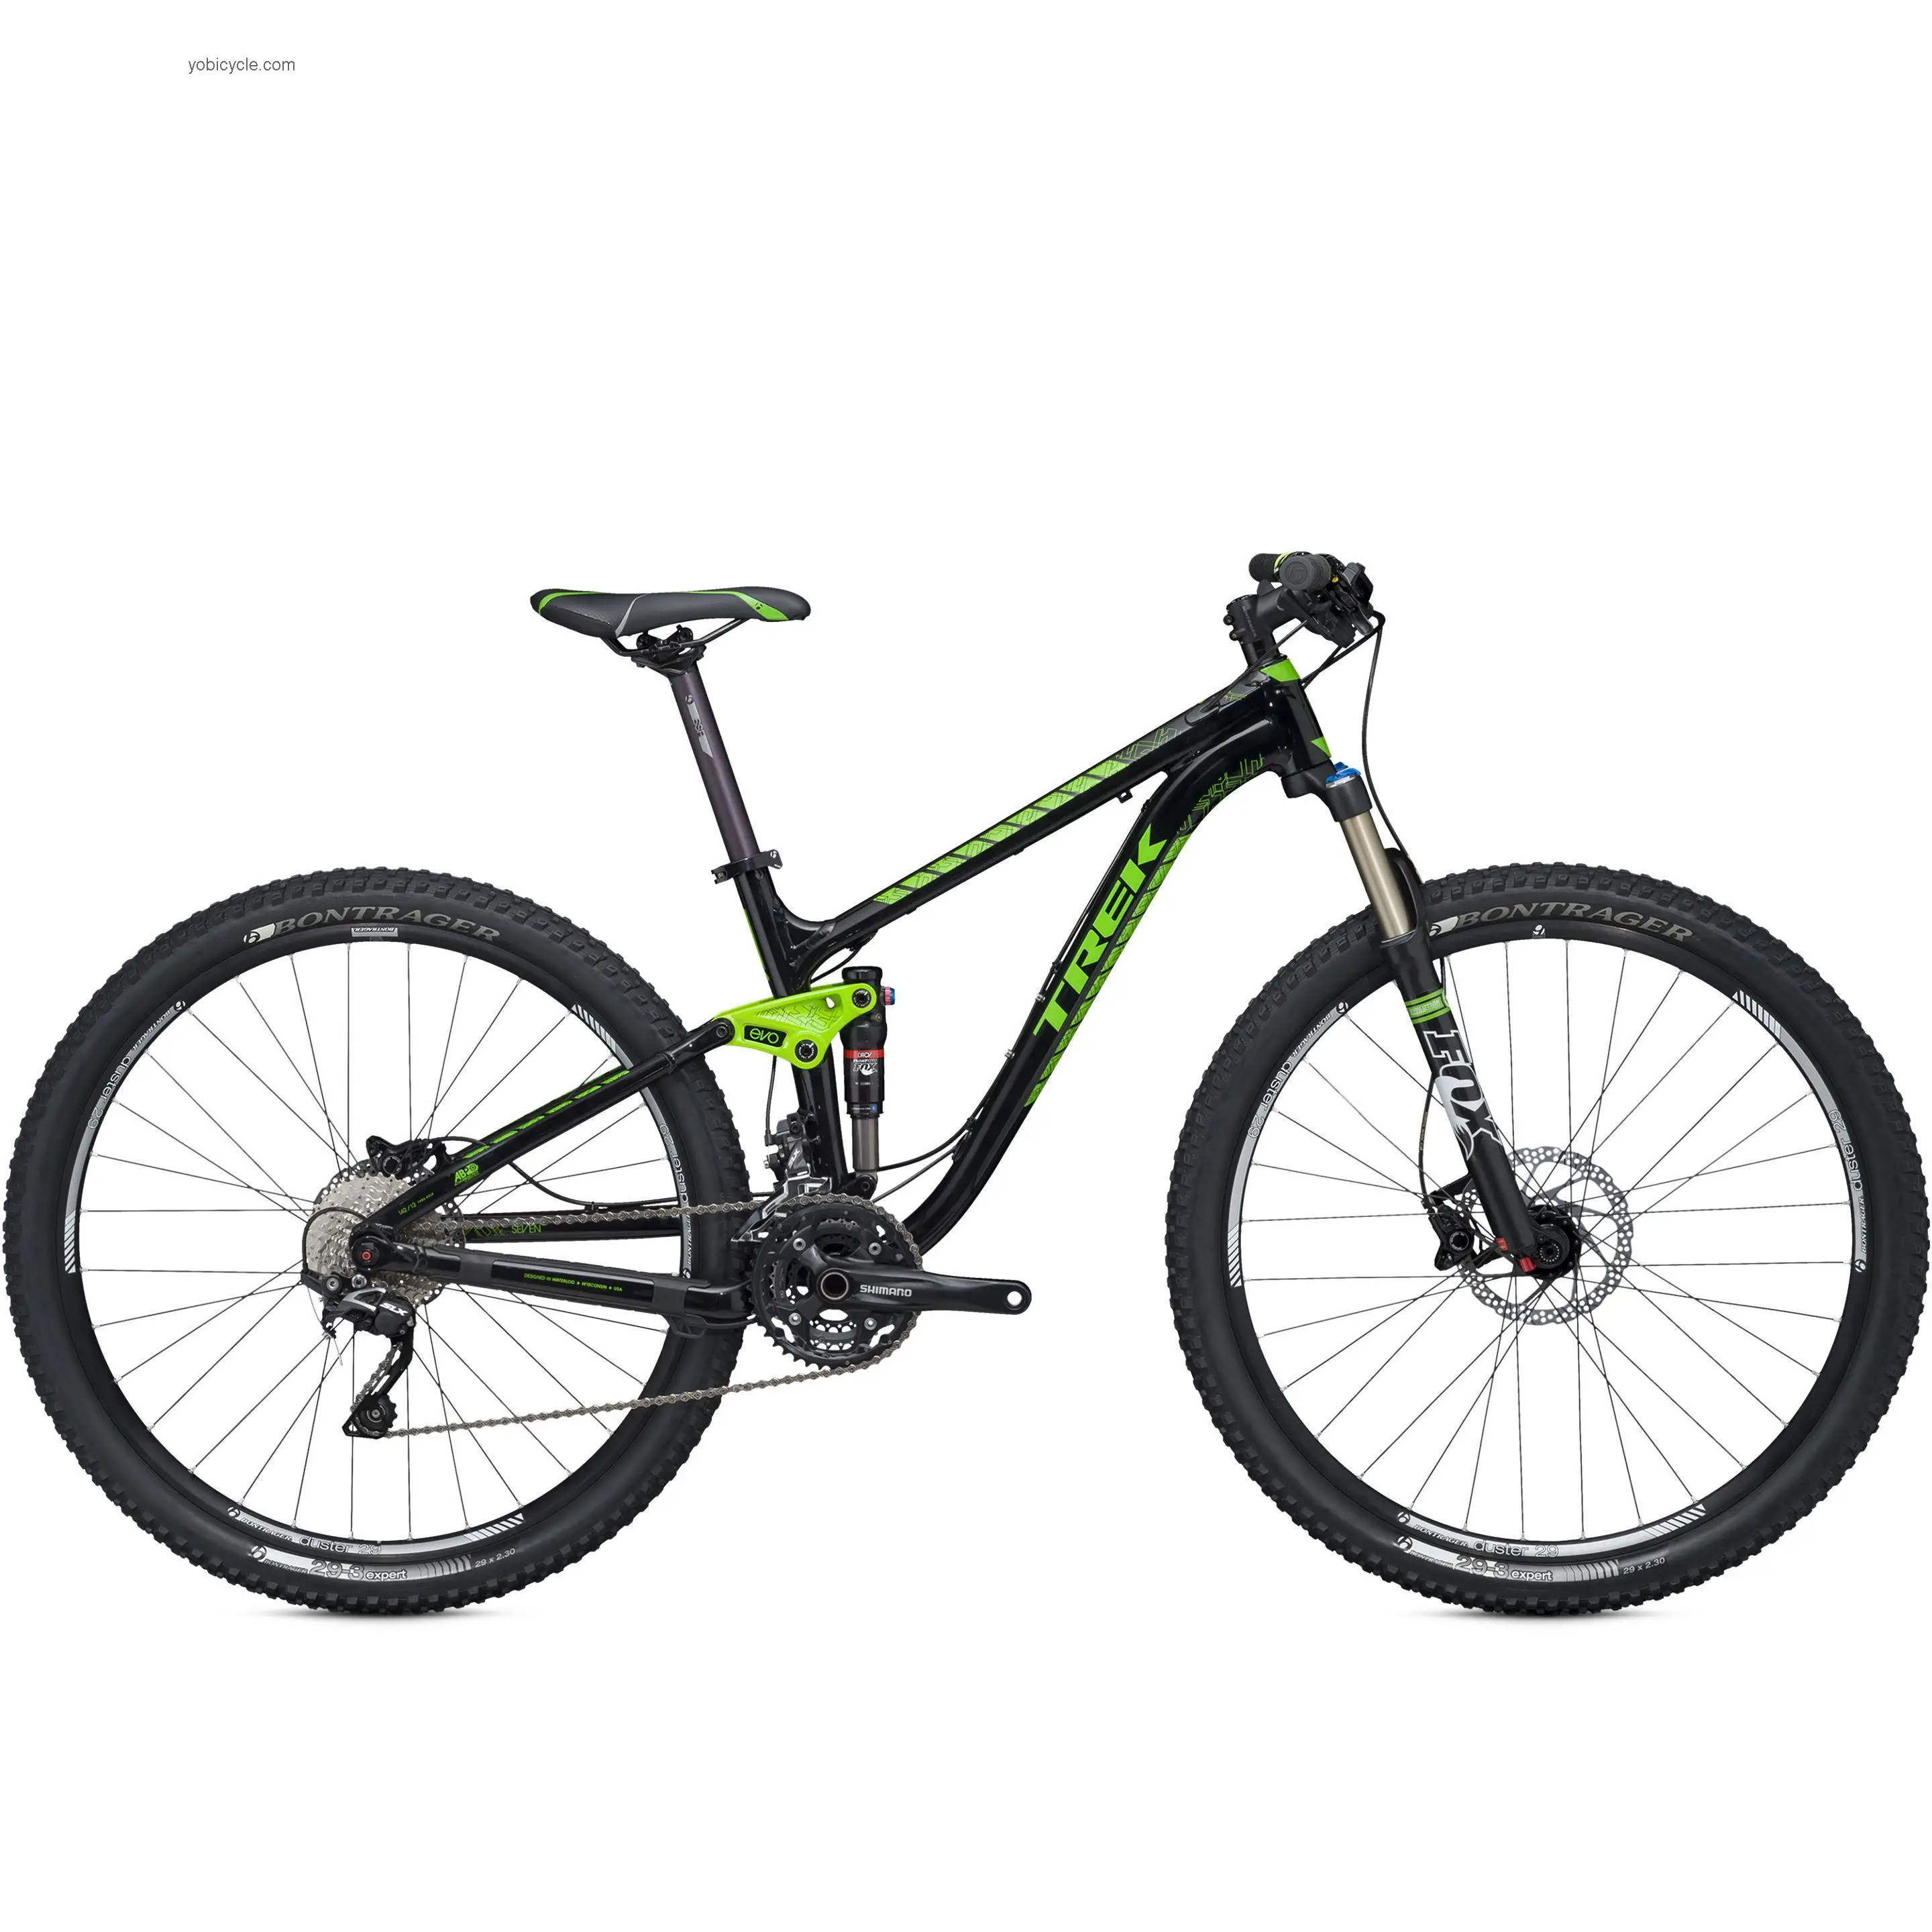 Trek Fuel EX 7 29 competitors and comparison tool online specs and performance